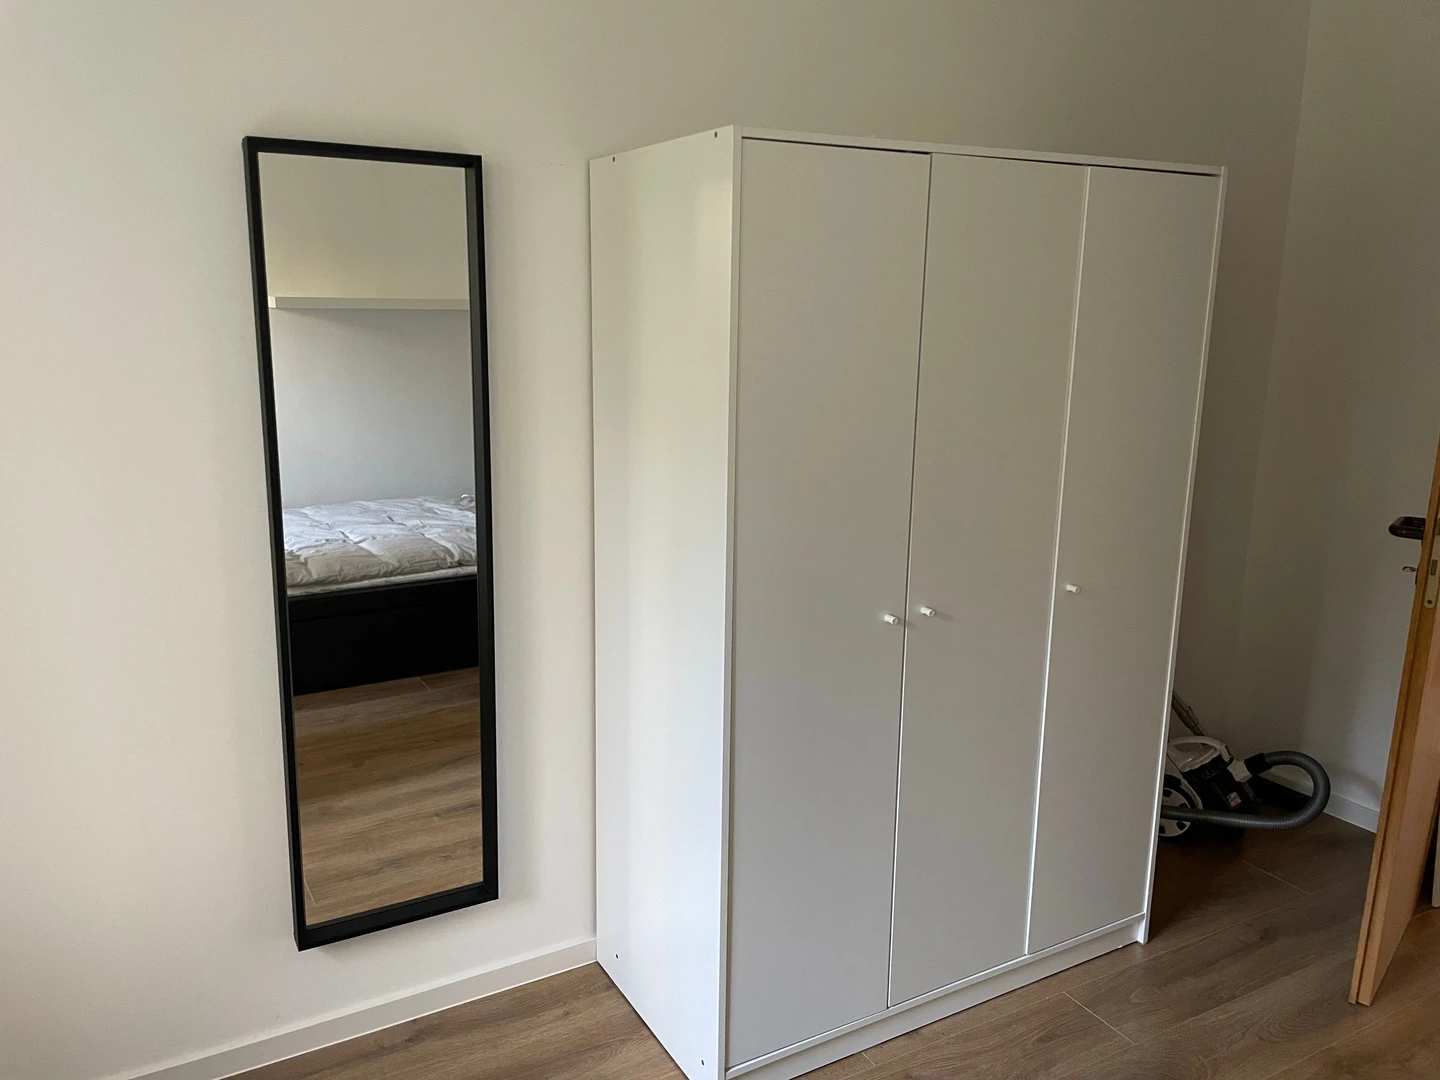 Room for rent with double bed Leipzig